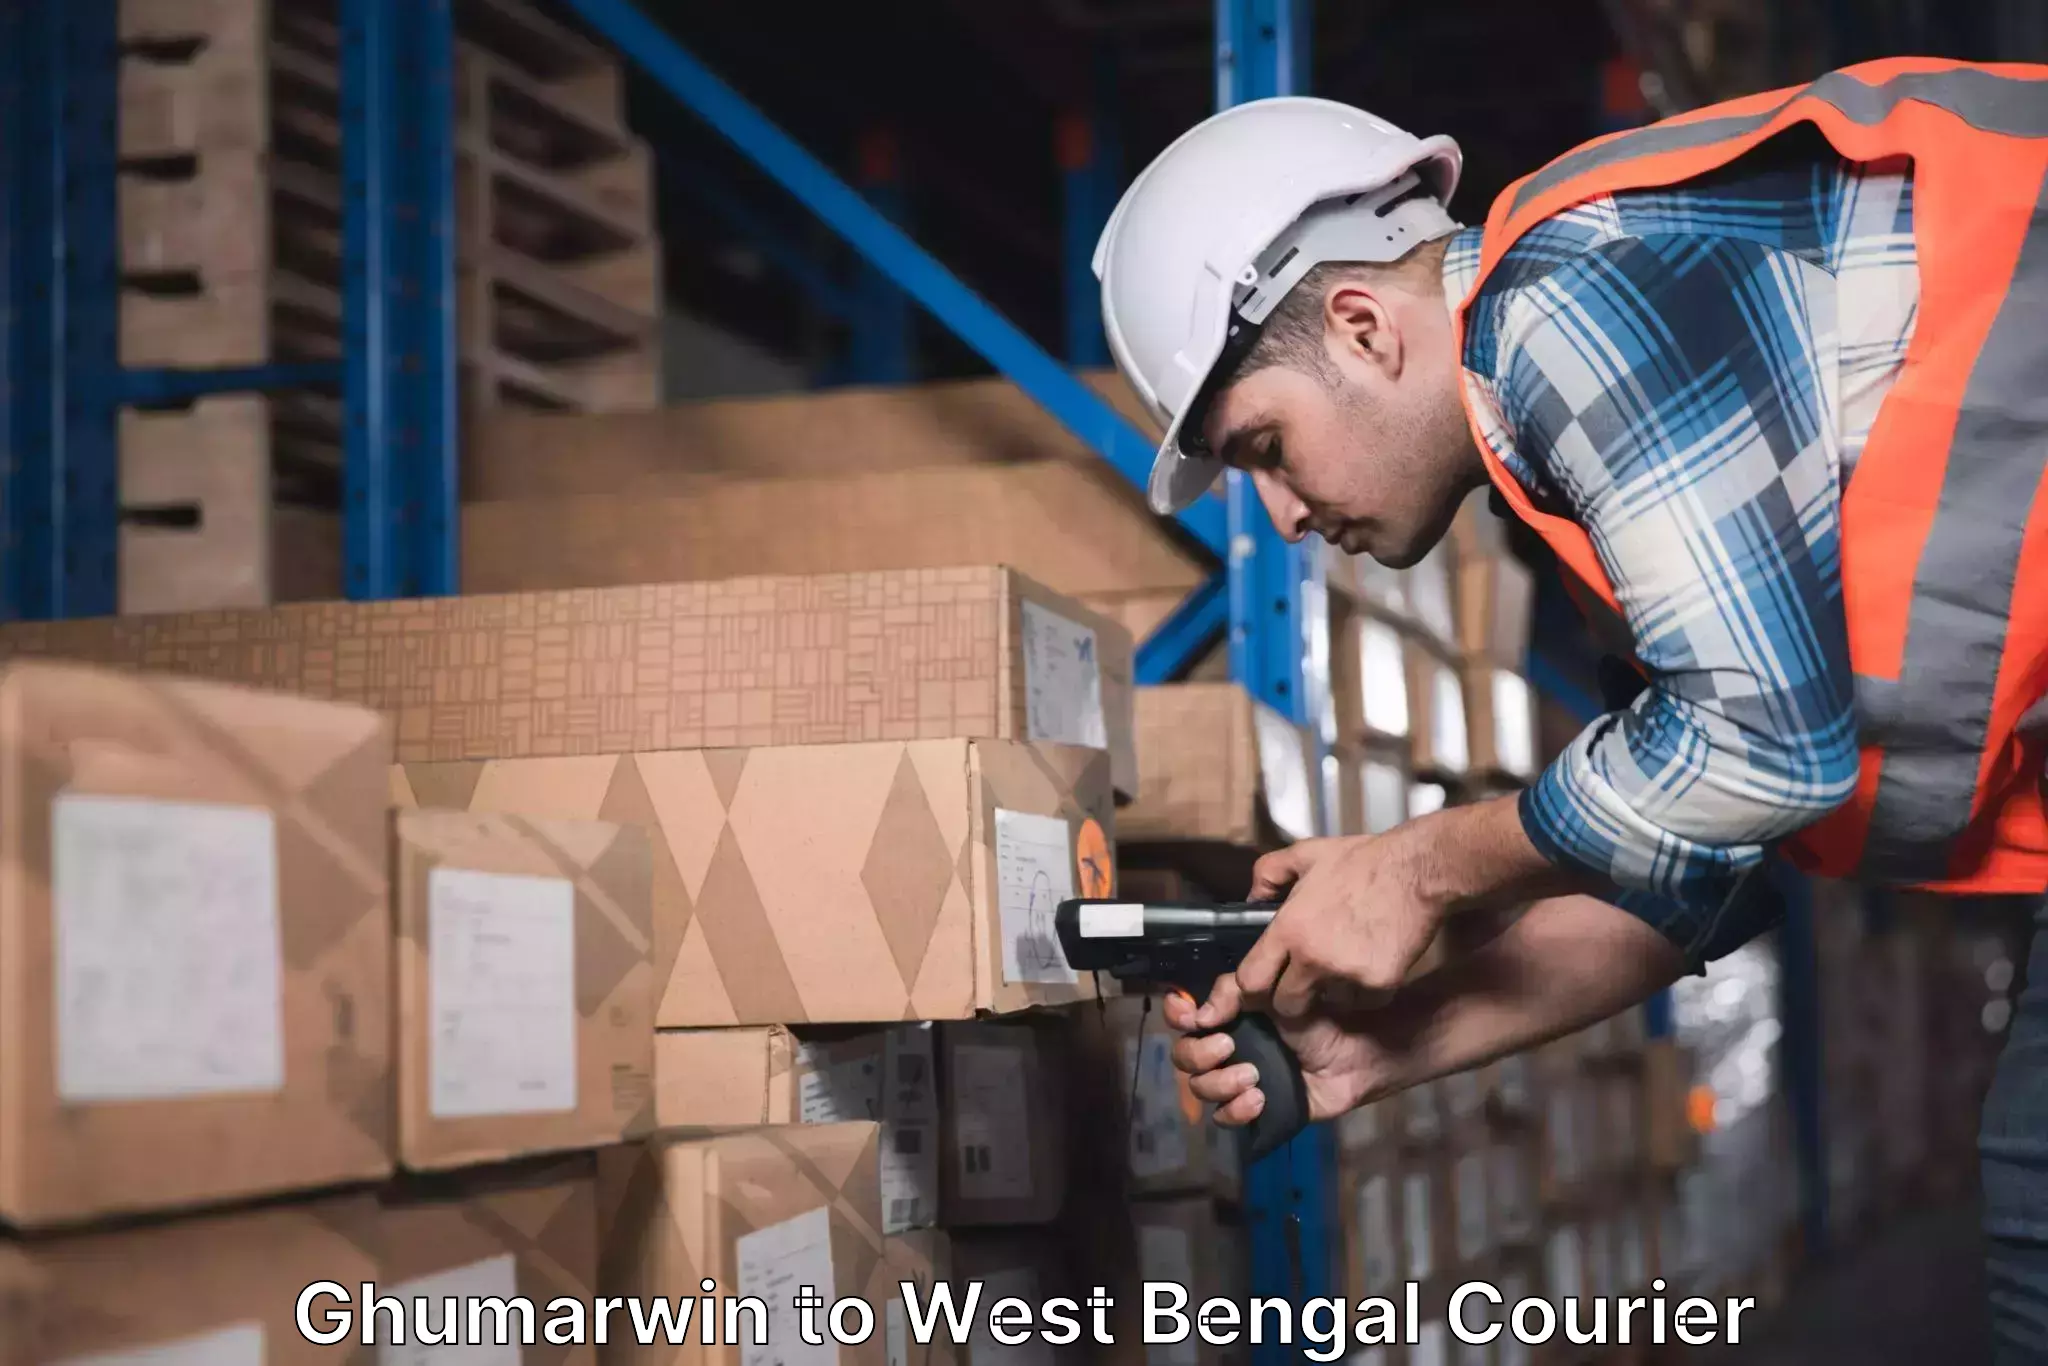 Tailored delivery services Ghumarwin to Kolkata Port